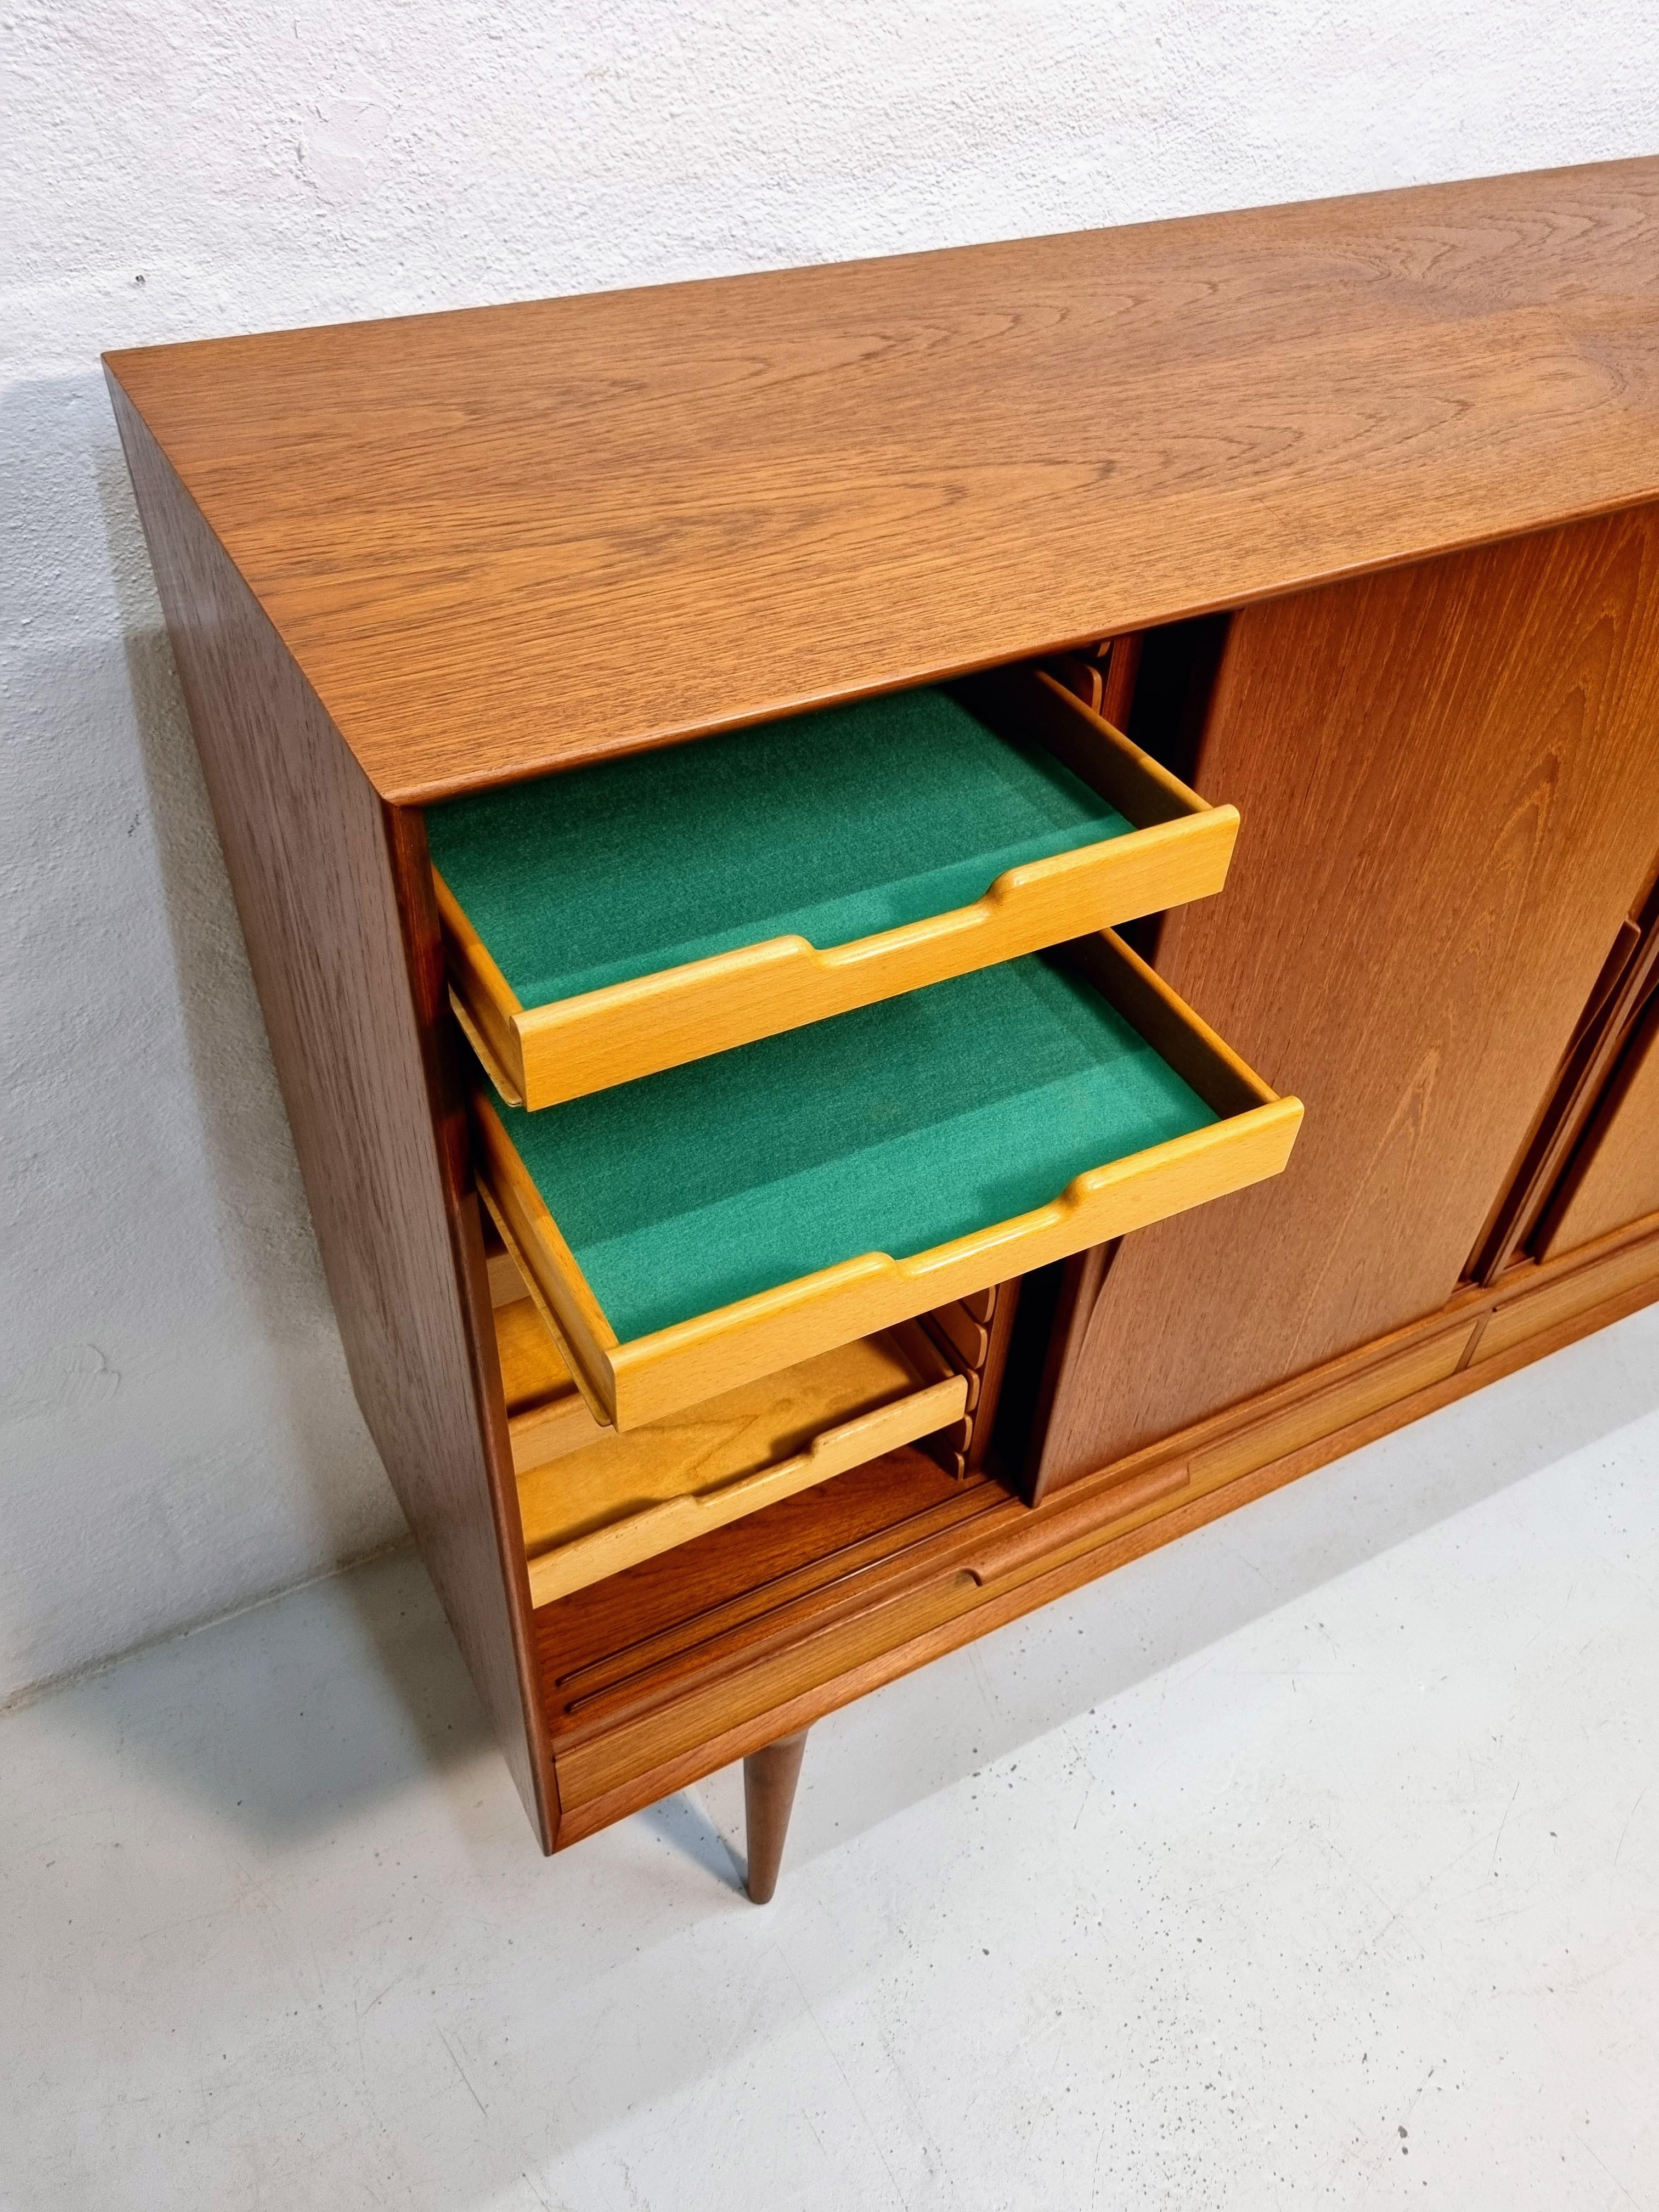 Highboard made of teak, Model no 13 by Gunni Omann for Omann Junior furniture factory.  
Made of quality materials with nice details such as the nice triangular handles.  
The sideboard consists of 2 drawers at the bottom and above there are 4